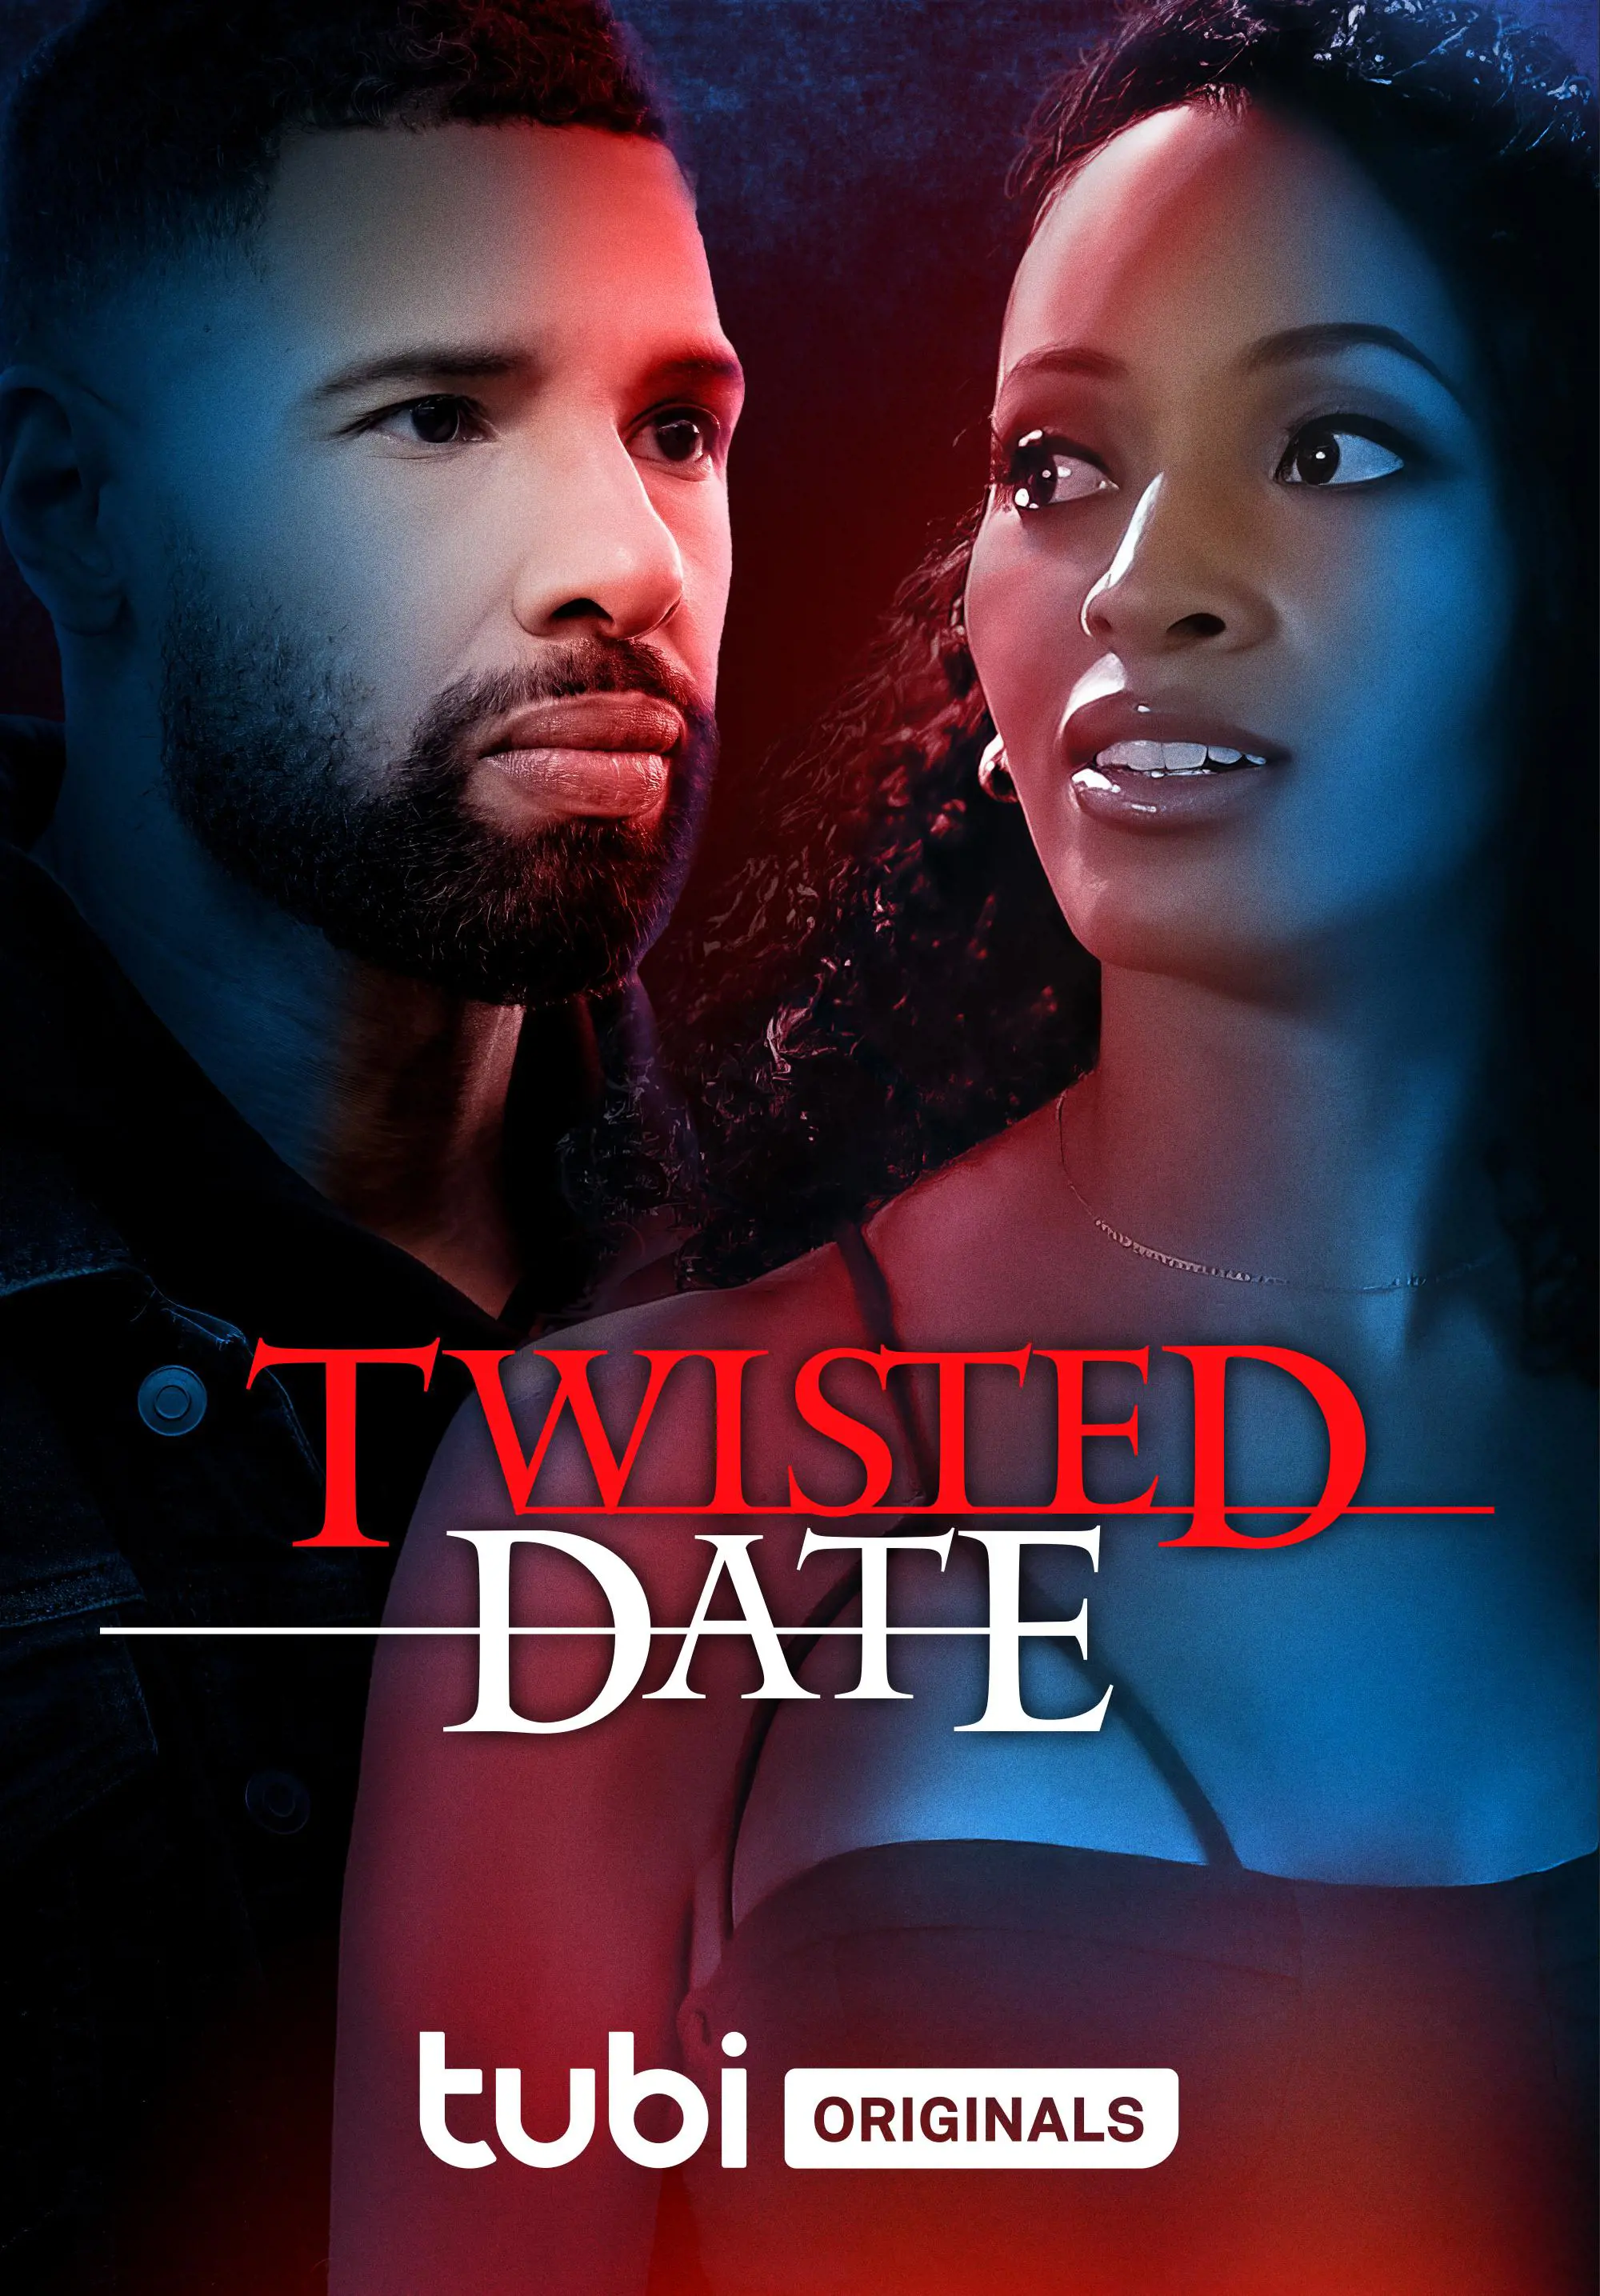 Twisted Date on Tubi premiered on May 12, 2023. The movie is written and directed by Corey Grant